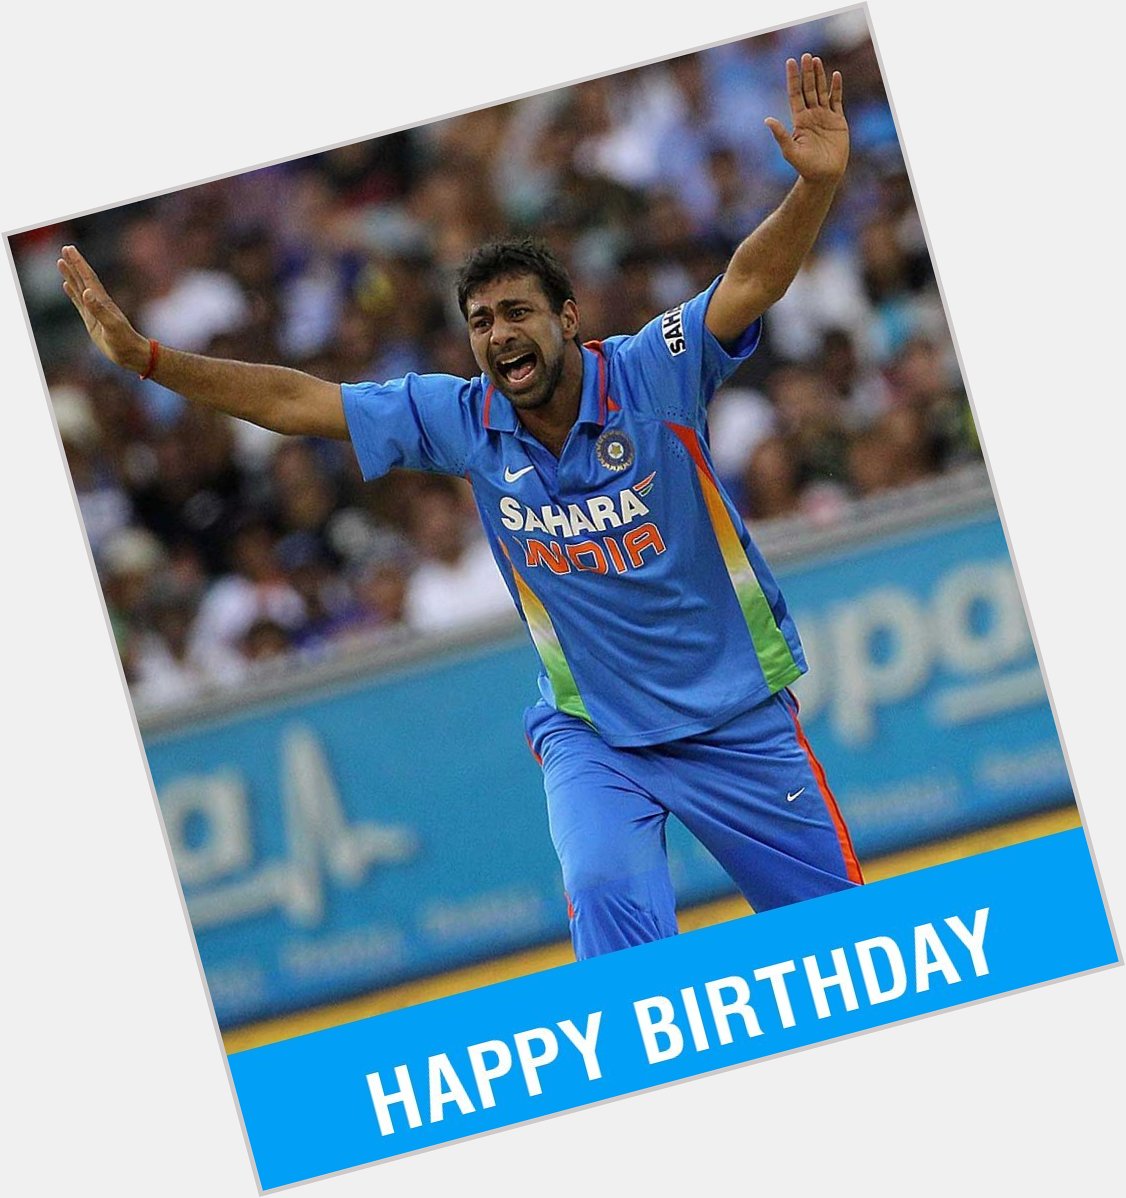  Happy birthday to Praveen Kumar, a cricketer born in a family of wrestlers 